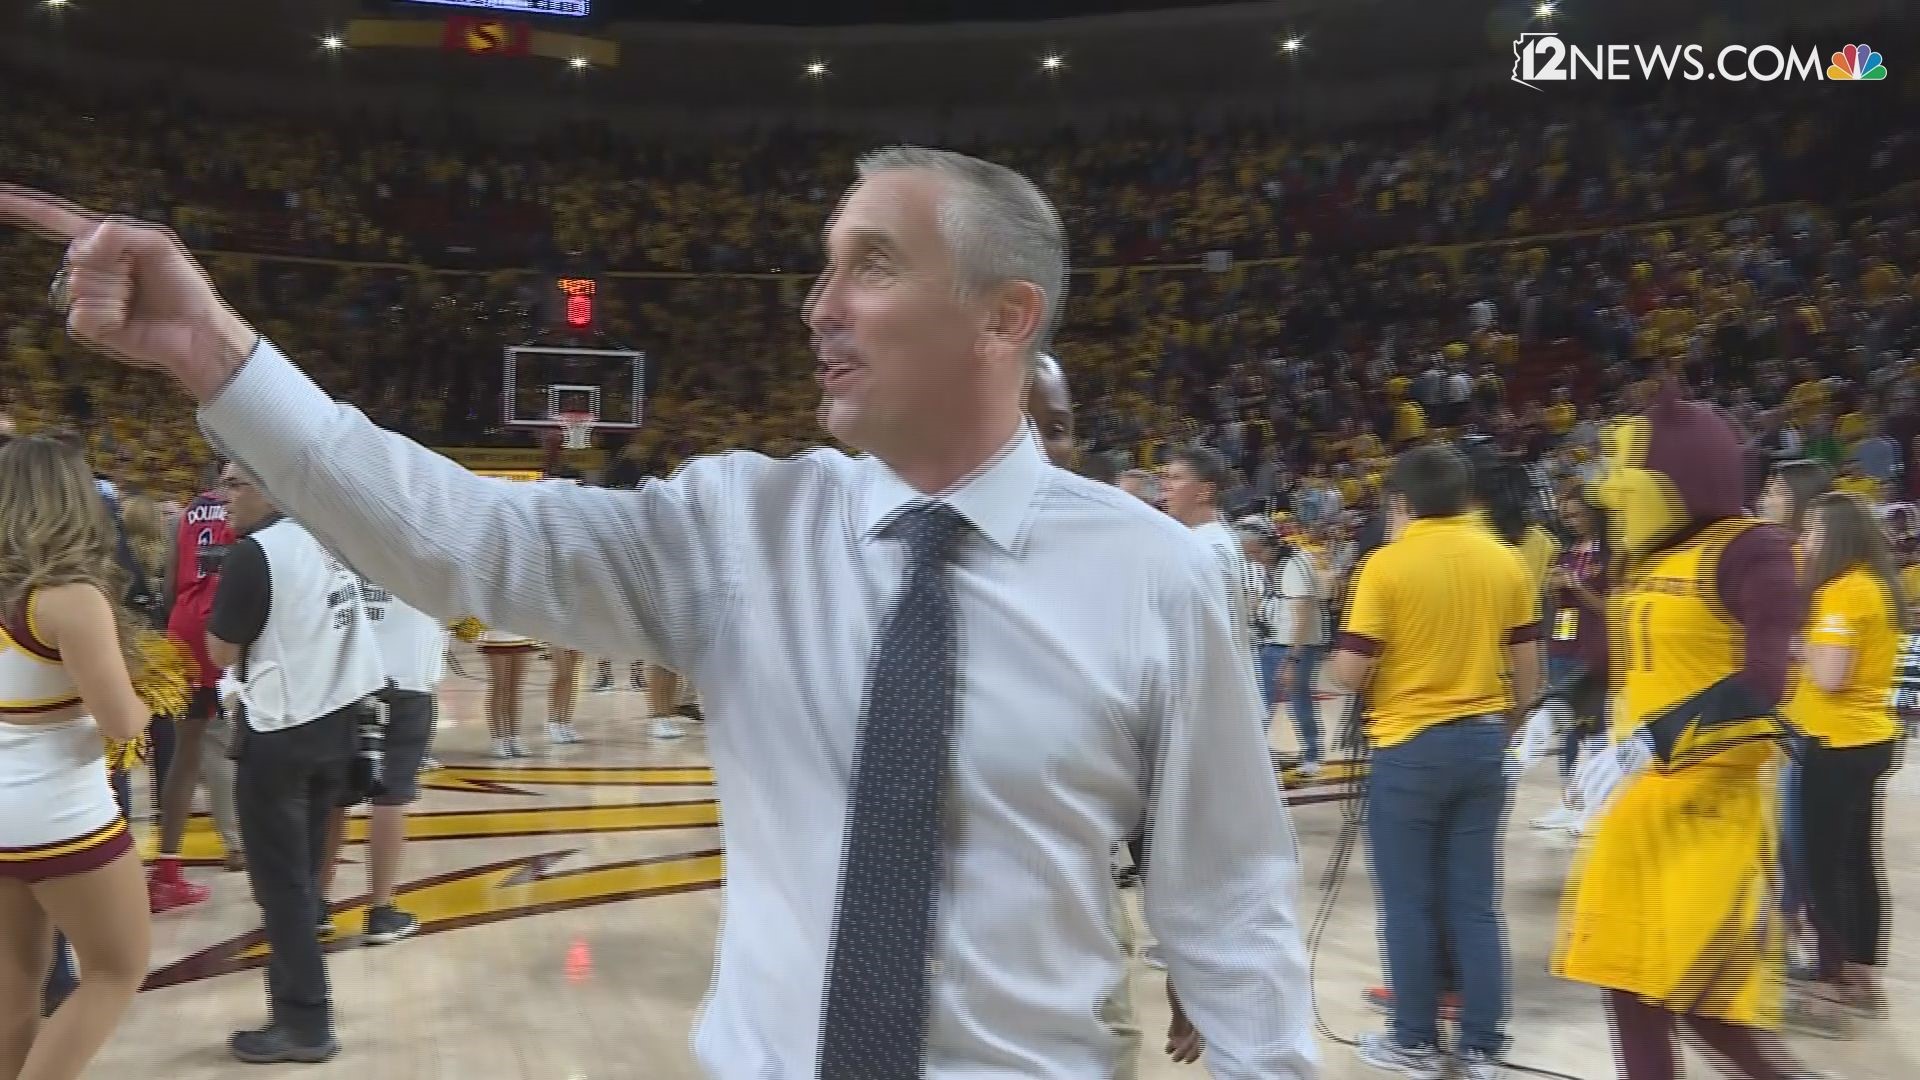 Bobby Hurley finally won his first game over the University of Arizona men's basketball team. The game went into OT, but that didn't make the W any less sweet!